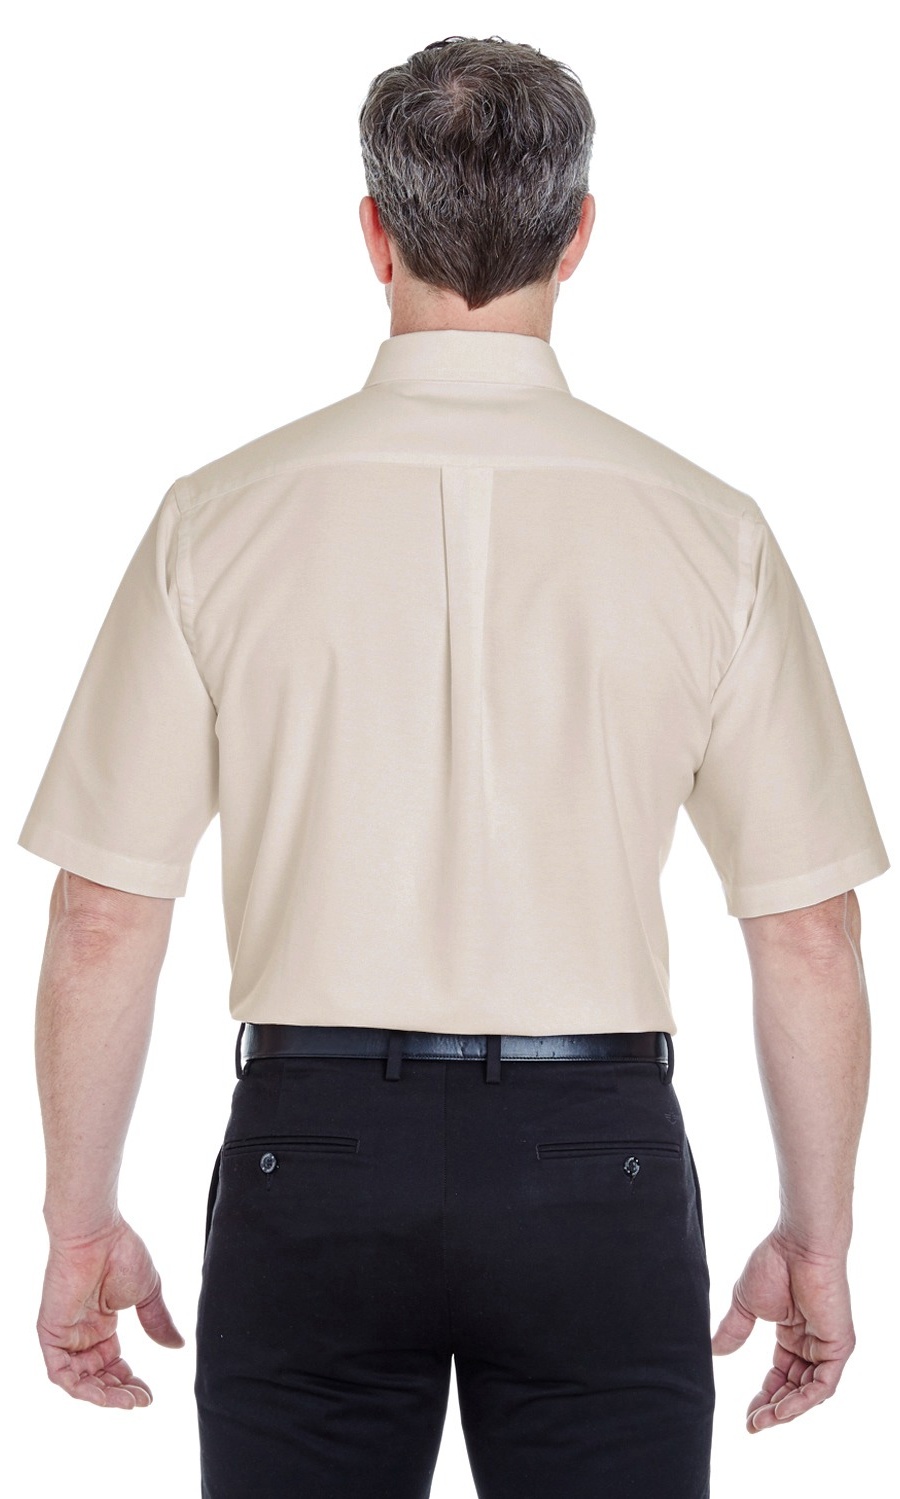 Ultraclub 8972 Men's Classic Wrinkle-Resistant Short-Sleeve Oxford - image 2 of 3